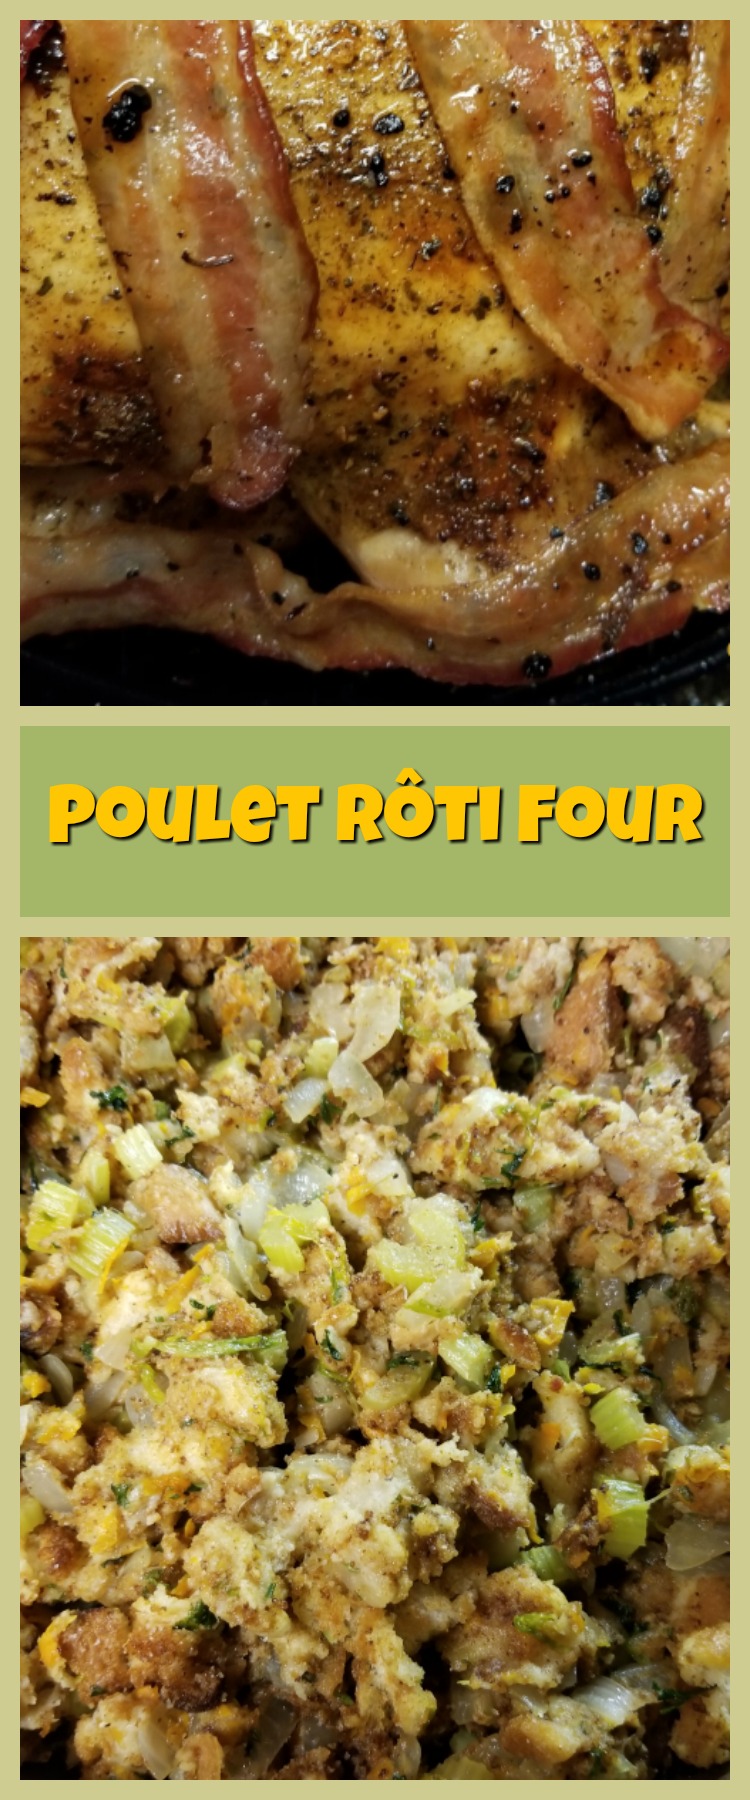 Poulet Rôti Four - With this easy week night recipe for a roast chicken dinner, we're taking on everyday homestyle French cooking à la mode de chez nous.